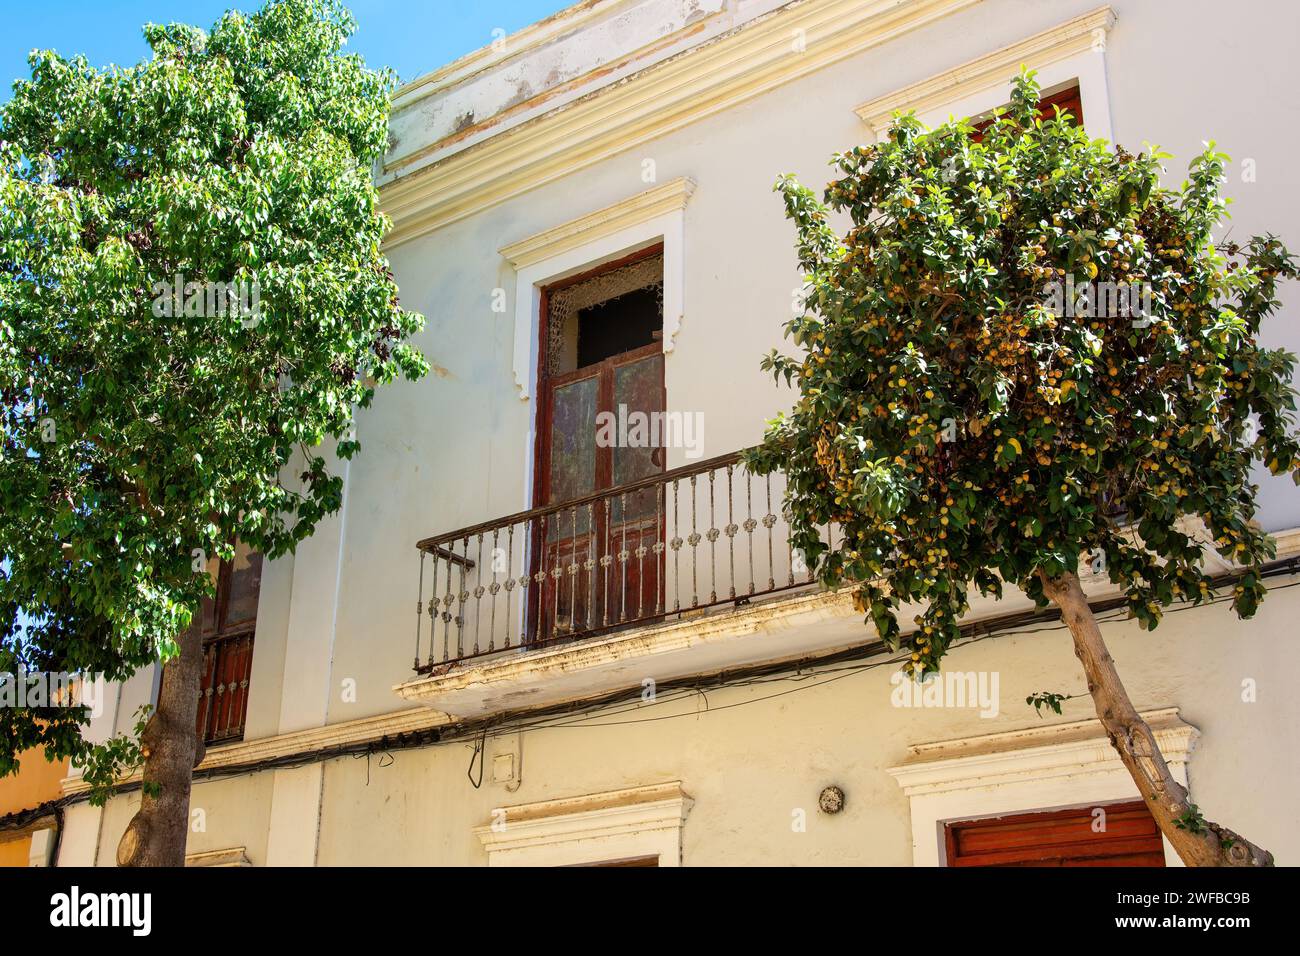 Balcony with a balcony door on an old house in Spain on the Canary Island of Gran Canaria, with trees Stock Photo